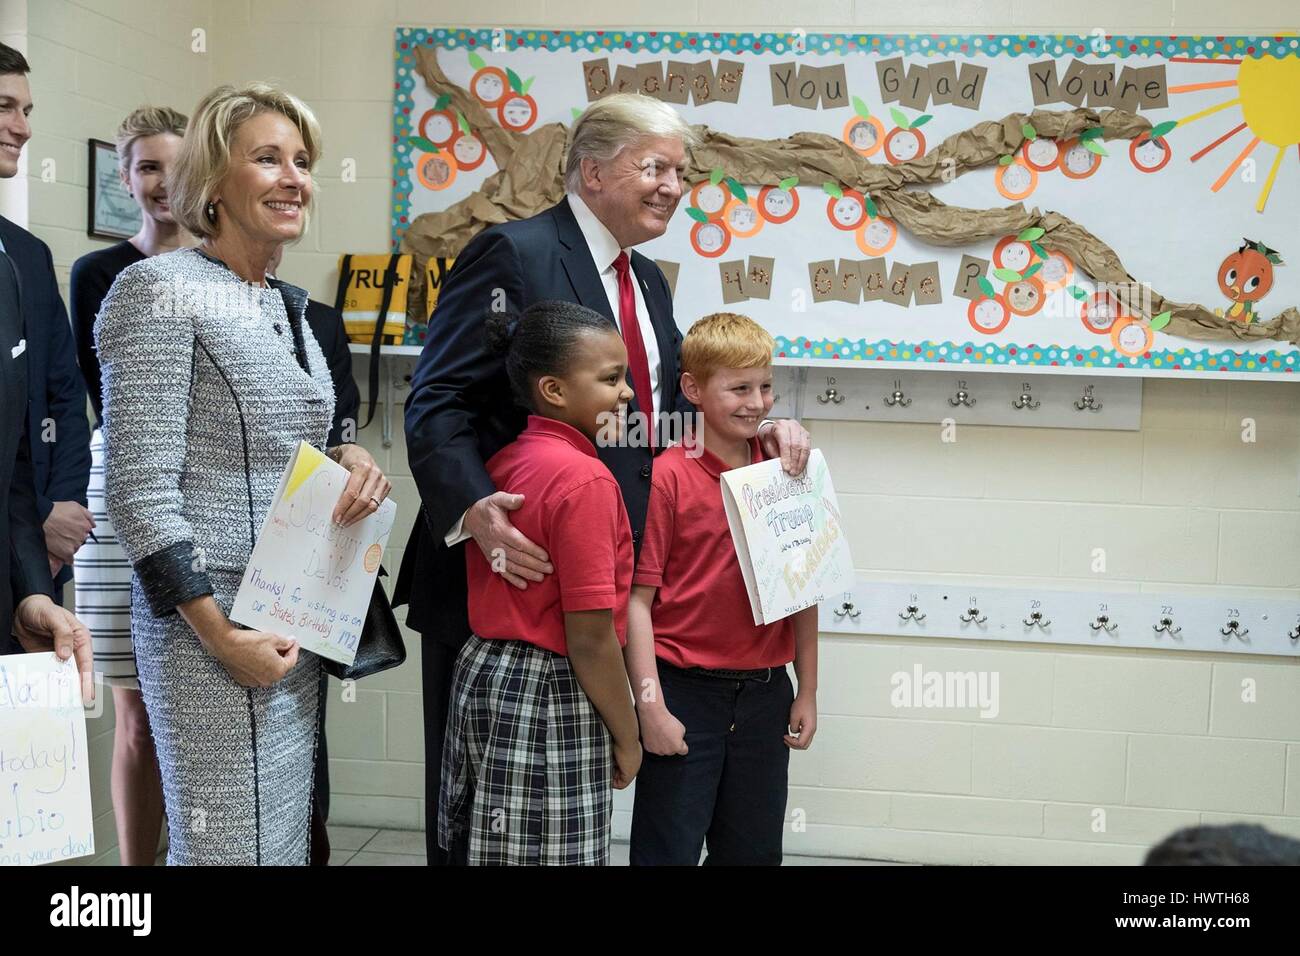 U.S President Donald Trump and Secretary of Education Betsy DeVos, left, pose for a photo with students of Saint Andrew Catholic School during a tour of the school March 3, 2017 in Orlando, Florida. Stock Photo